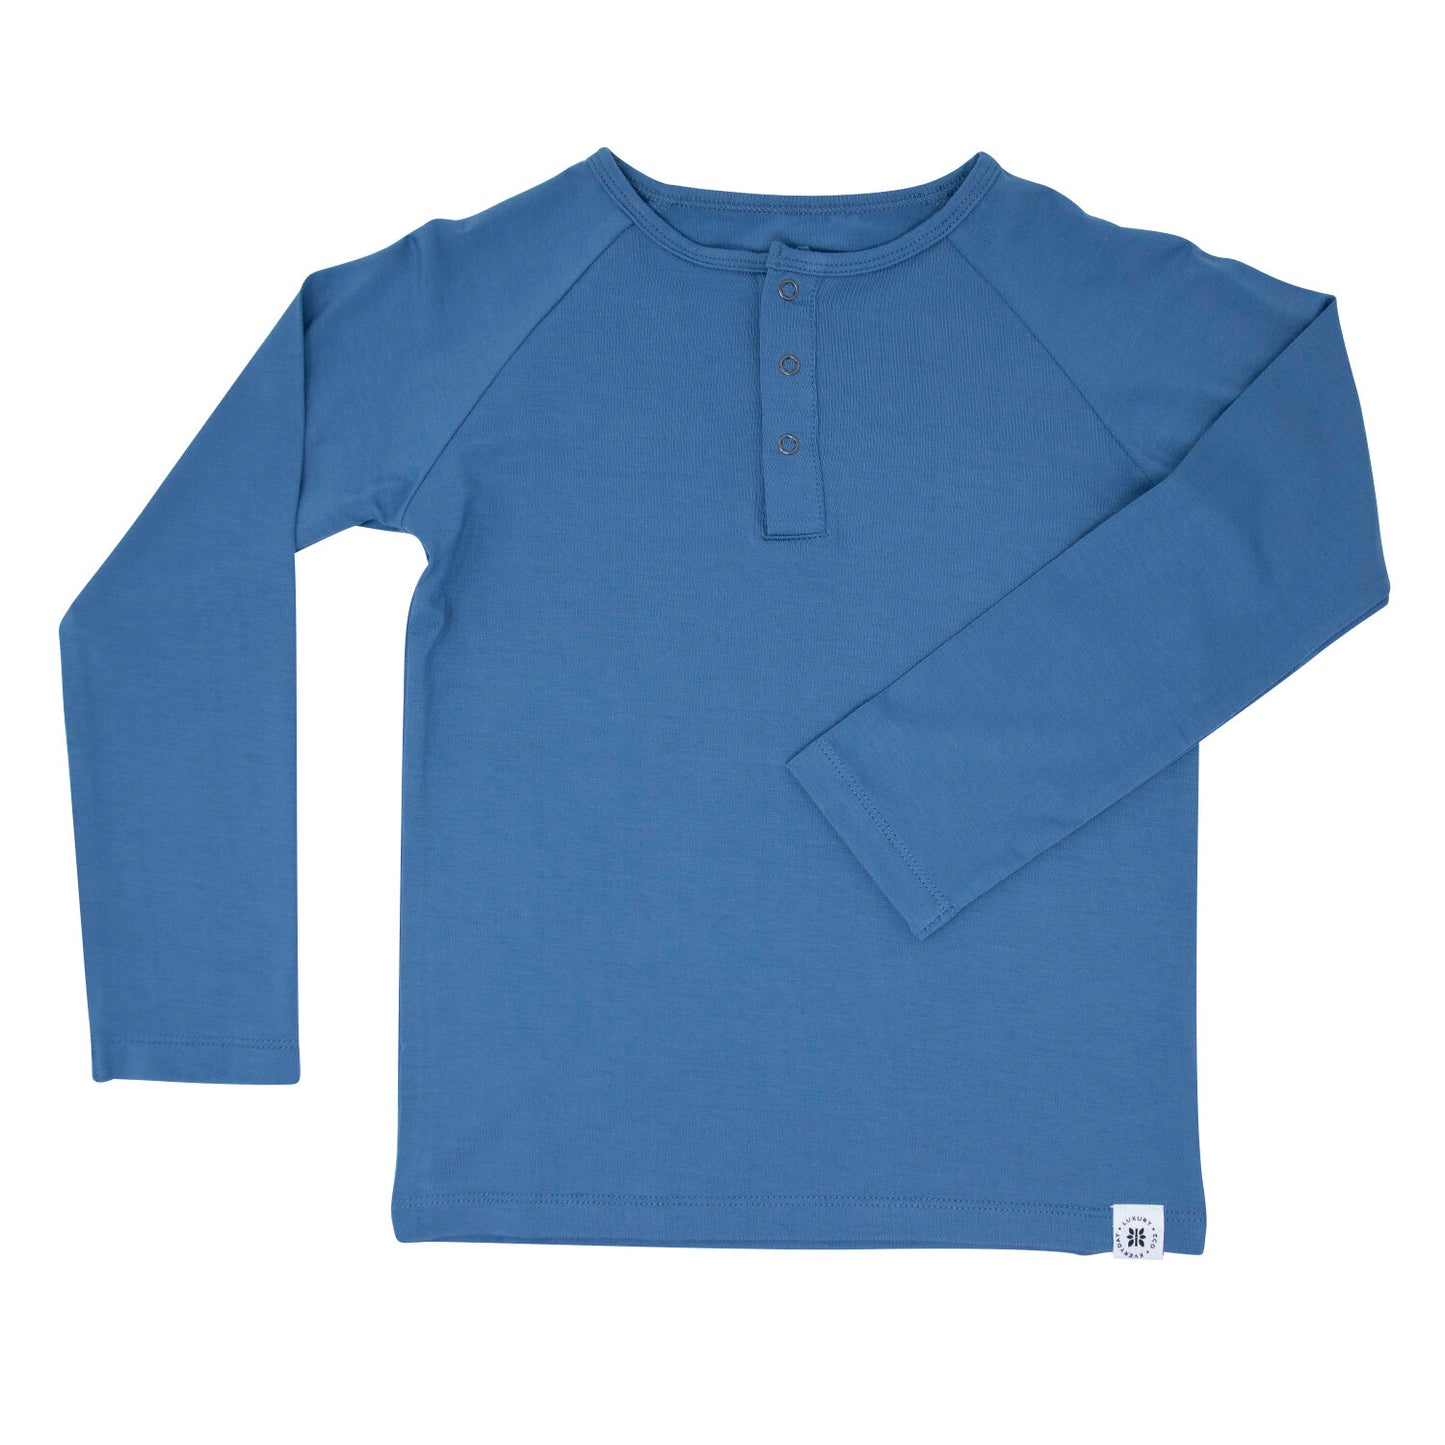 Captain Blue Bamboo Henley Long Sleeve. Ultra comfy! A long sleeve top with a deep front placket, finished with metal snaps.  Safe for sensitive skin. Tagless label for total comfort.  95% Viscose from Bamboo, 5% Spandex. Machine washable and dryable!